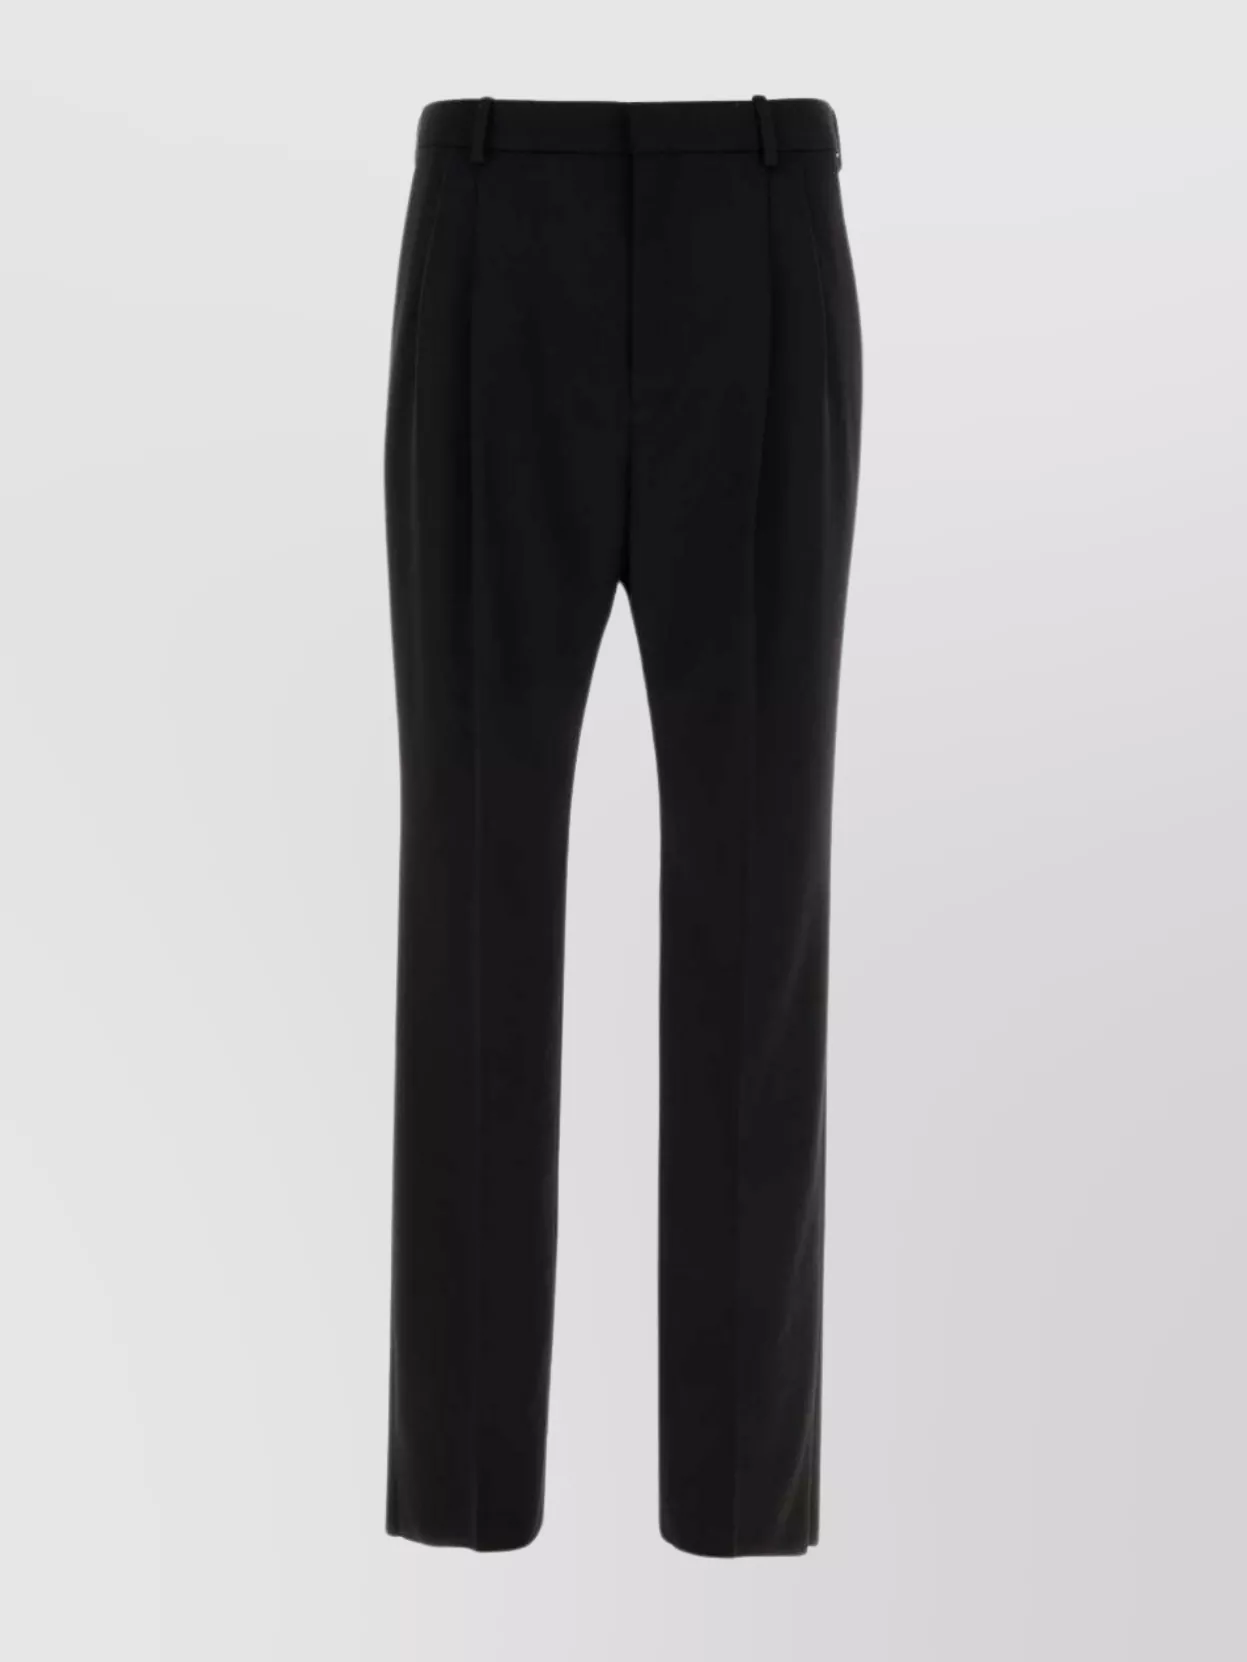 Saint Laurent Wool Trousers With Back Welt Pockets In Black